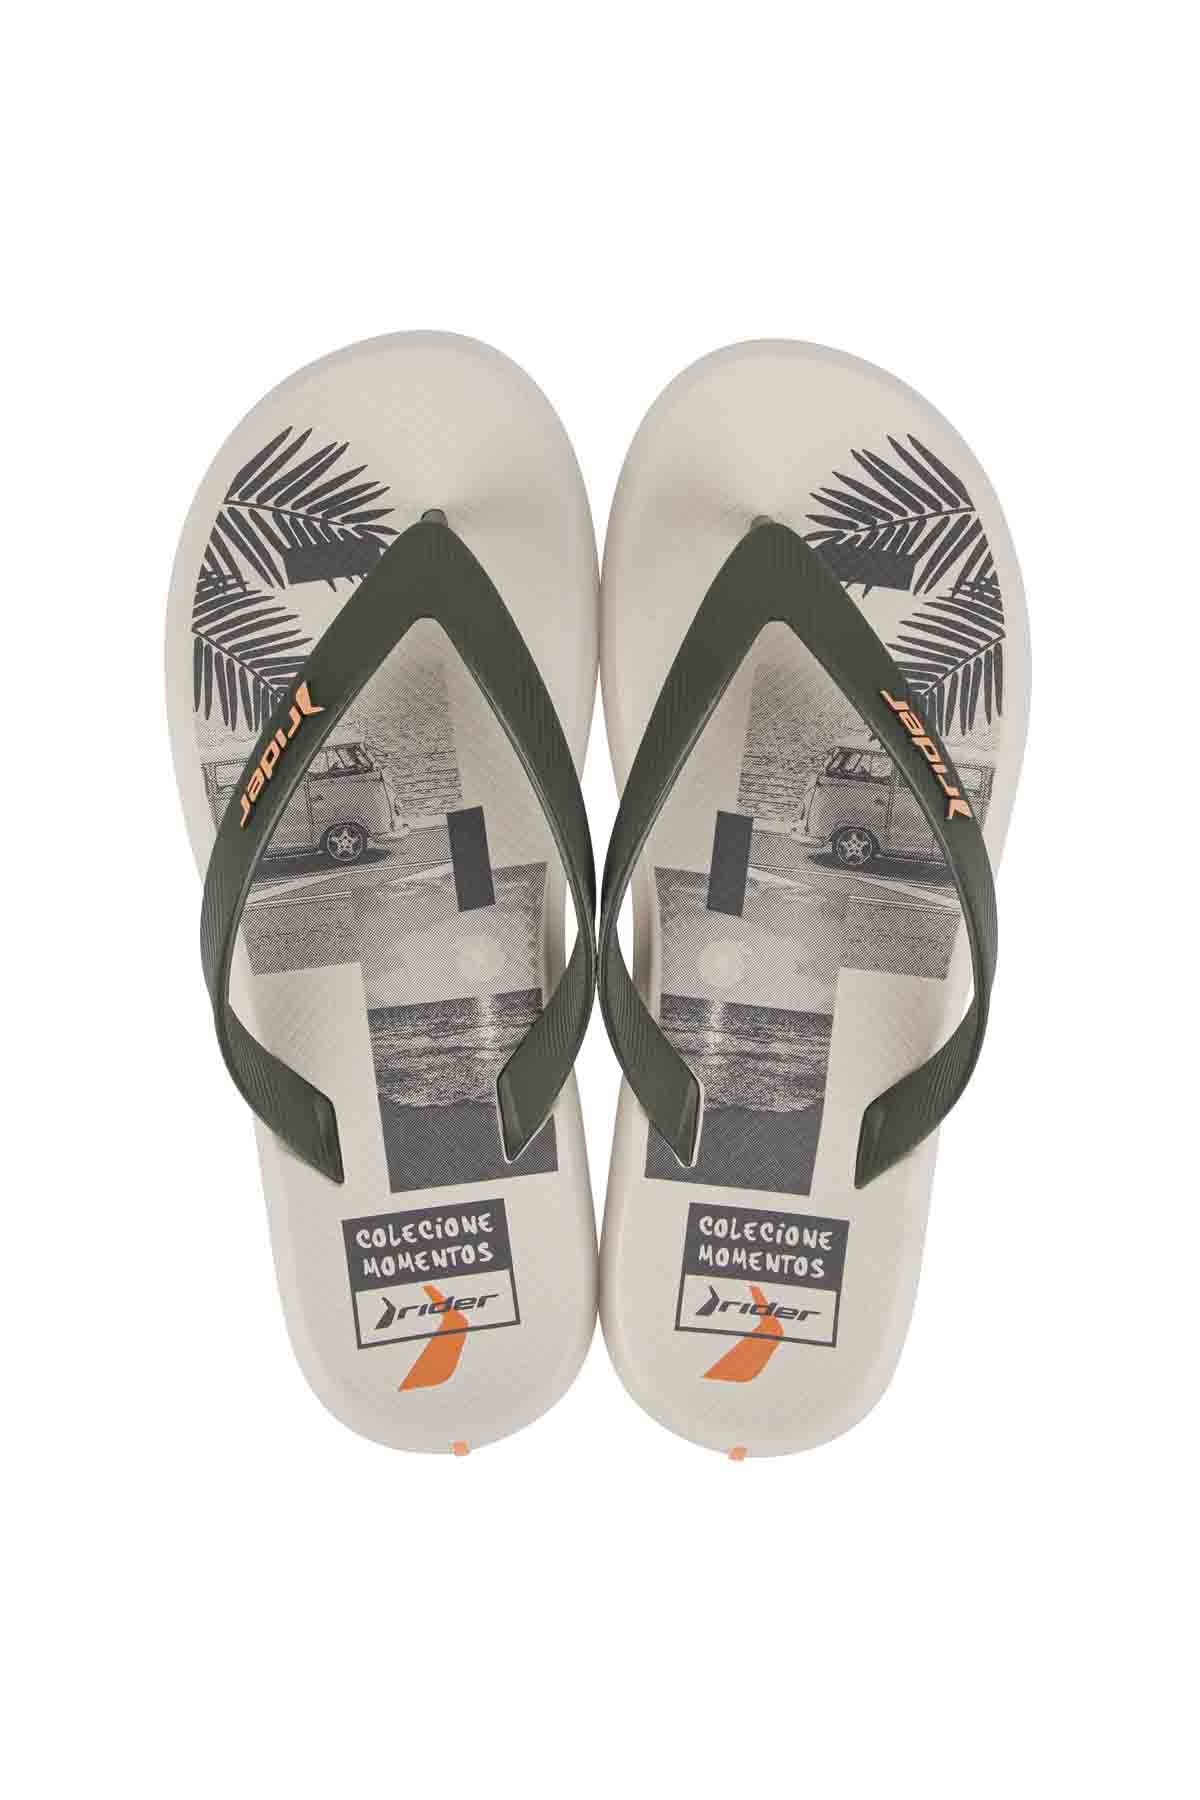 Image of Slippers Rider R1 energy